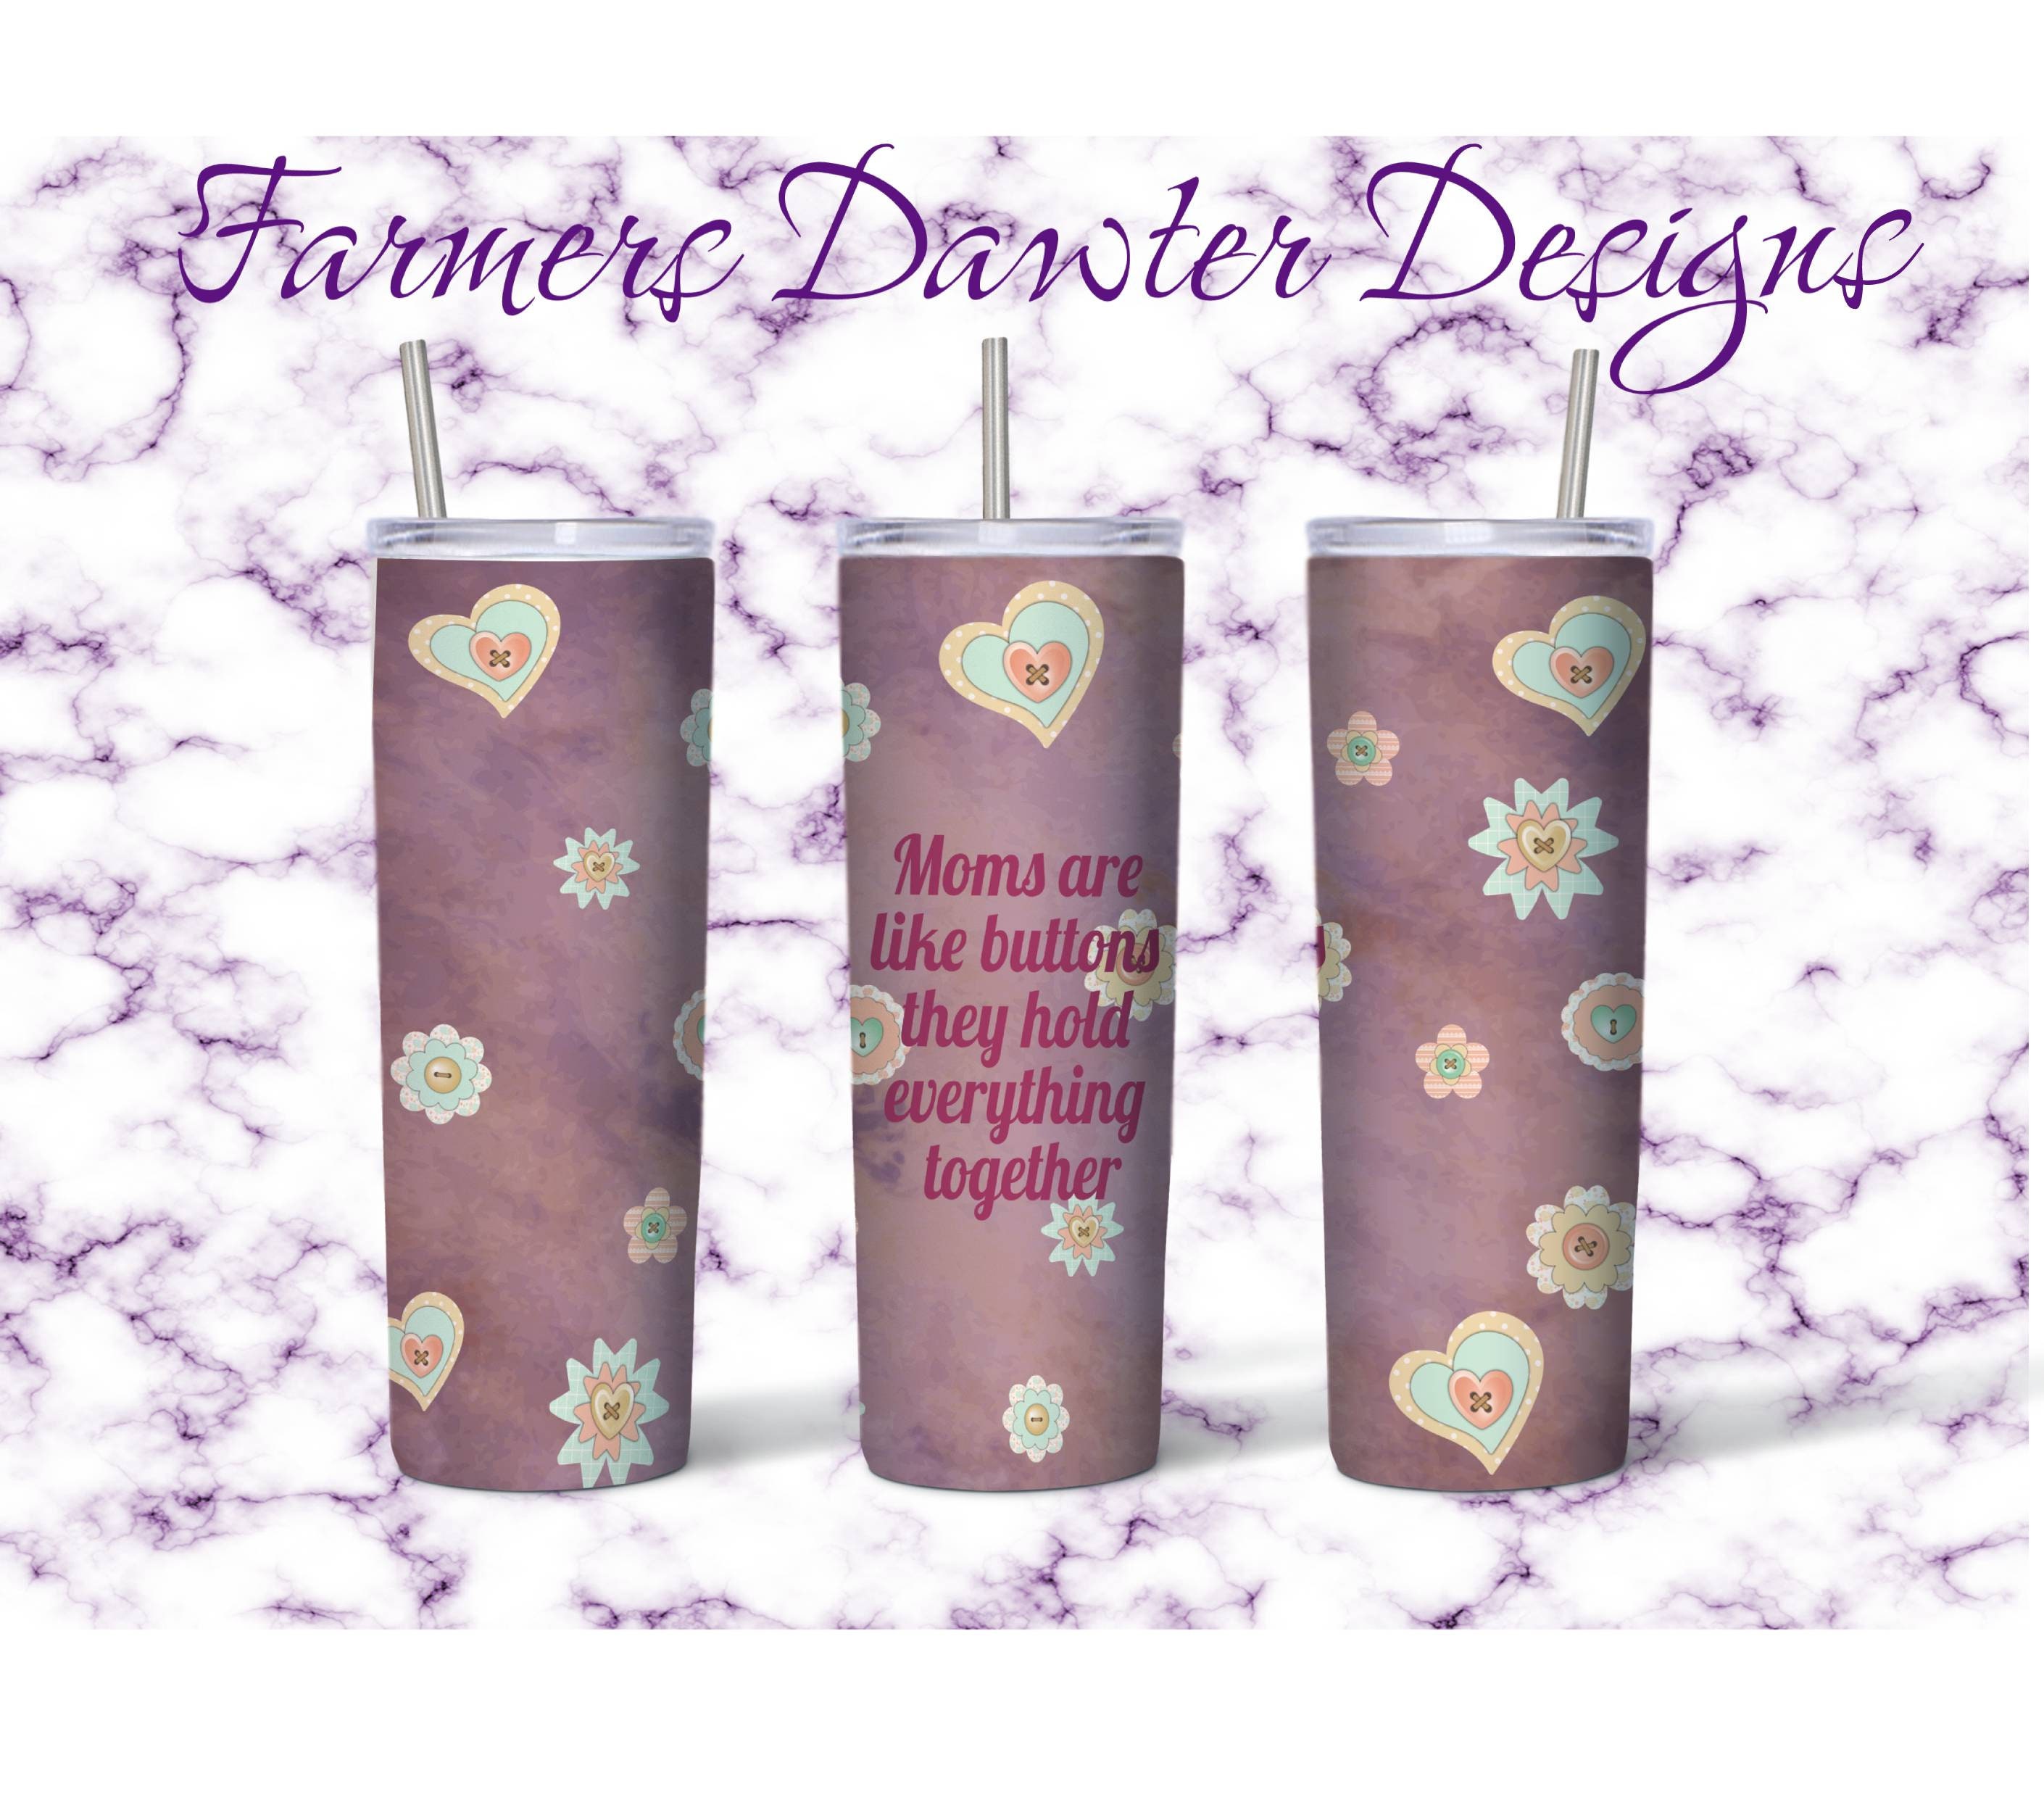 Mom Are Like Buttons Sublimation Wrap Graphic by Farmers Dawter